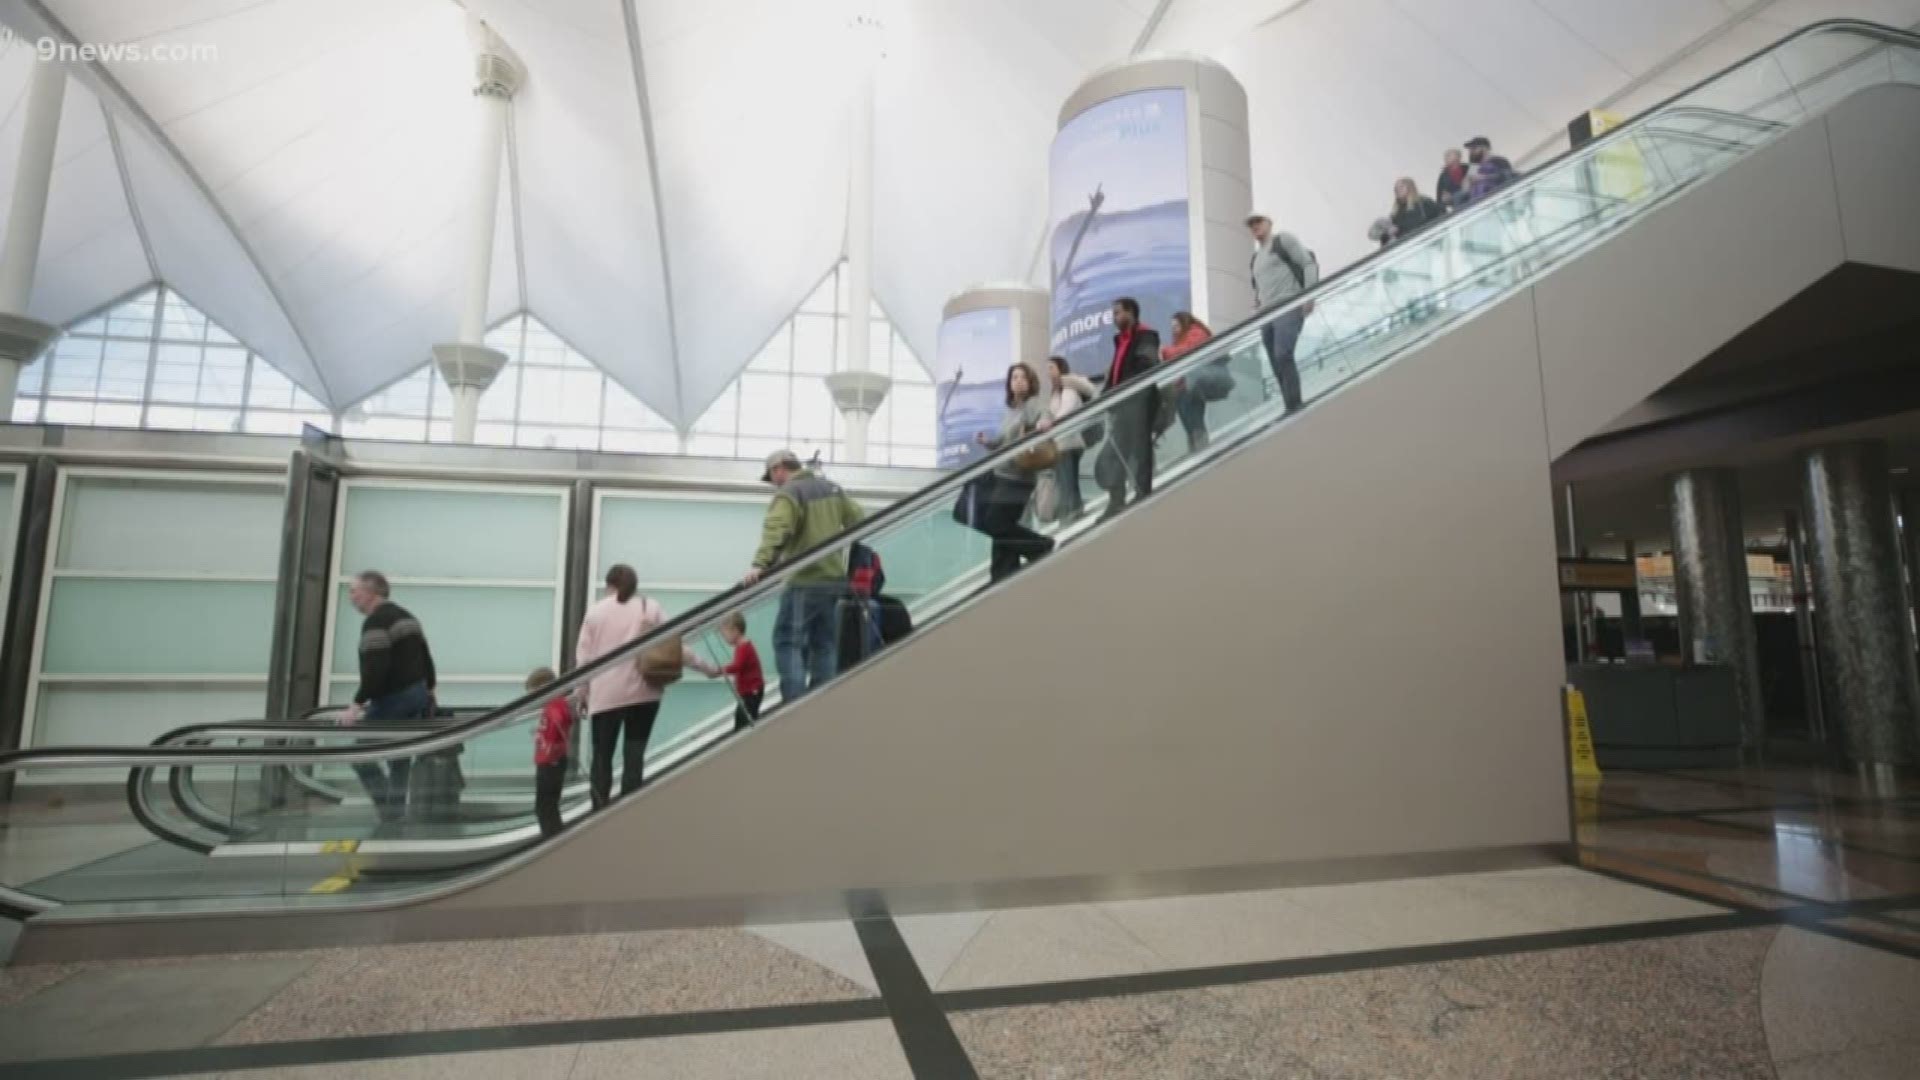 It's Denver International Airport's 25th birthday, but there are thousands of reasons some travelers aren't celebrating: escalator, elevator and walkway outages.